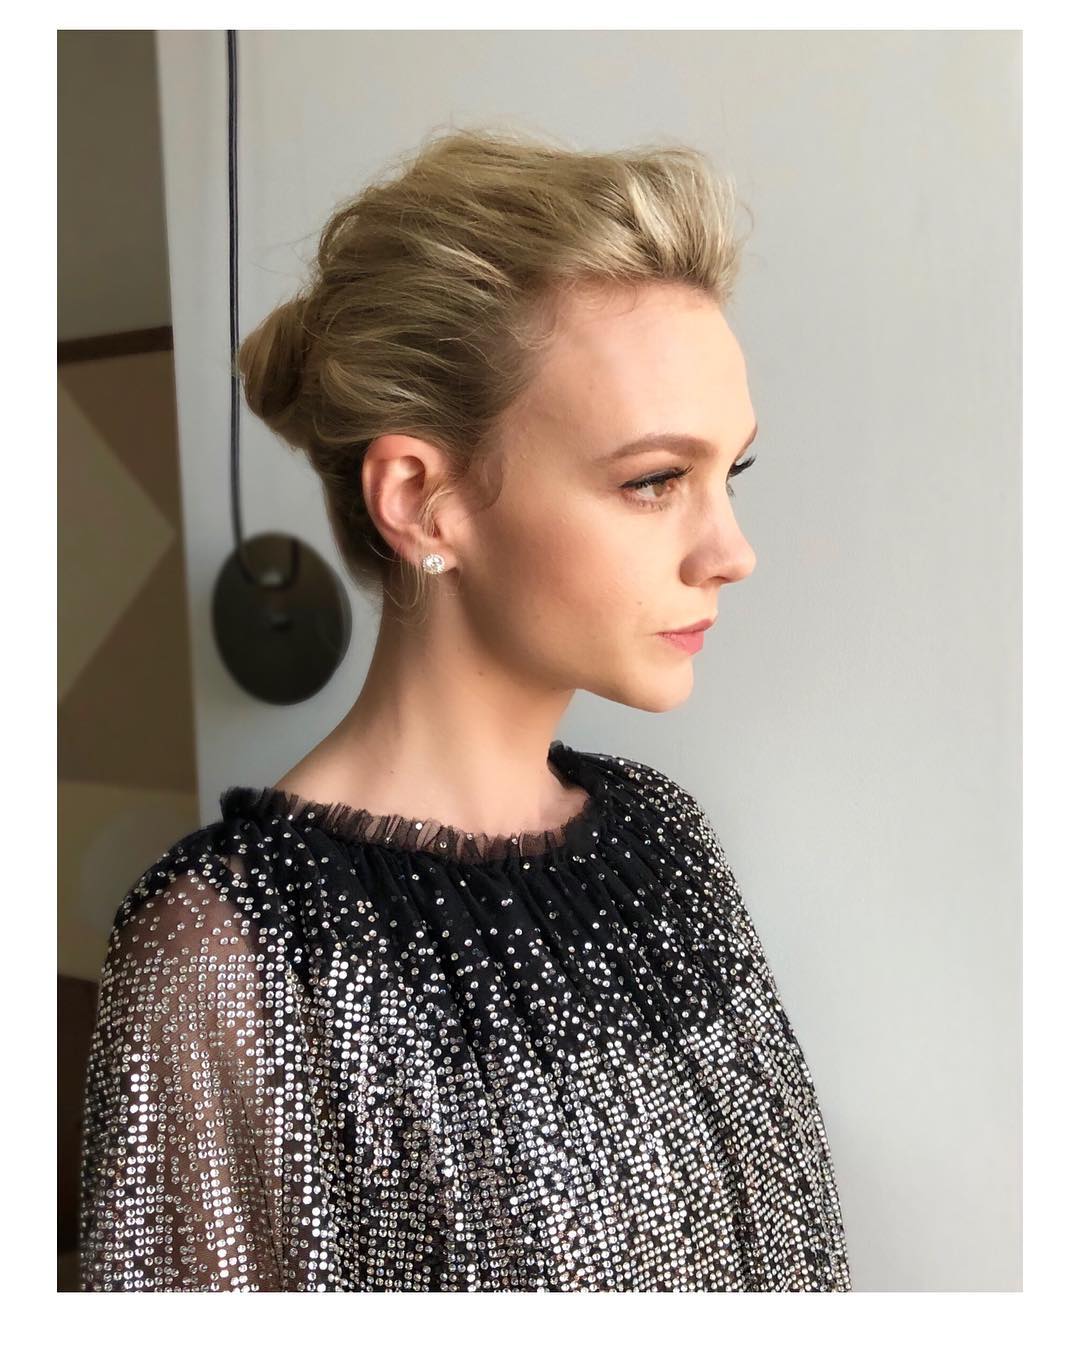 75+ Hot Pictures Of Carey Mulligan Will Prove That She Is One Of The Hottest Women Alive | Best Of Comic Books